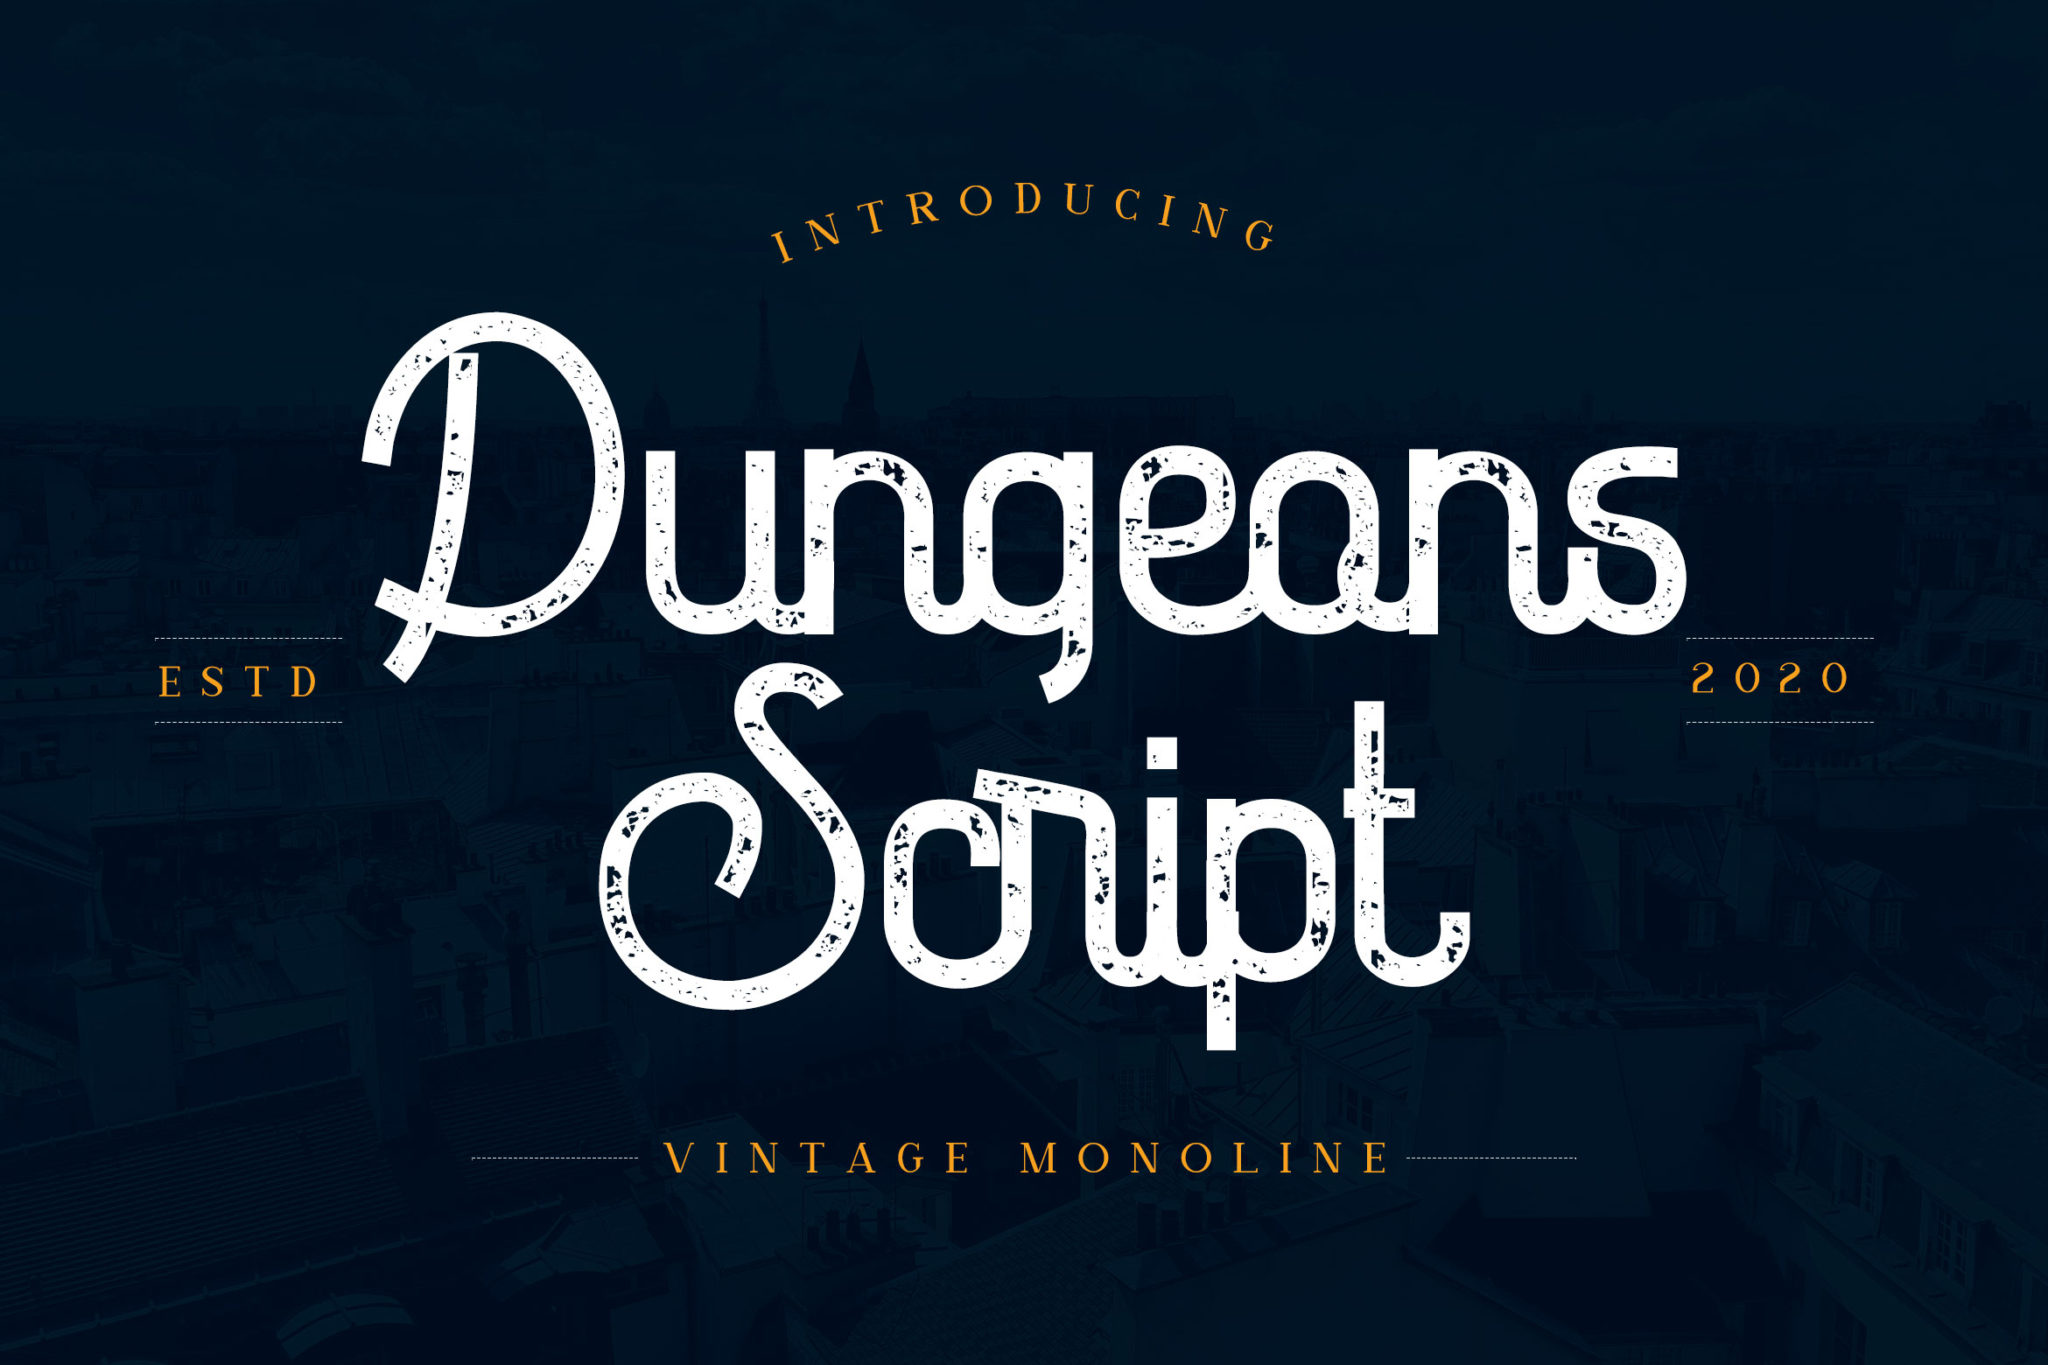 Шрифт Dungeon. Шрифт подземелье. Русский шрифт подземелье. Old Elegant font. Dungeon script